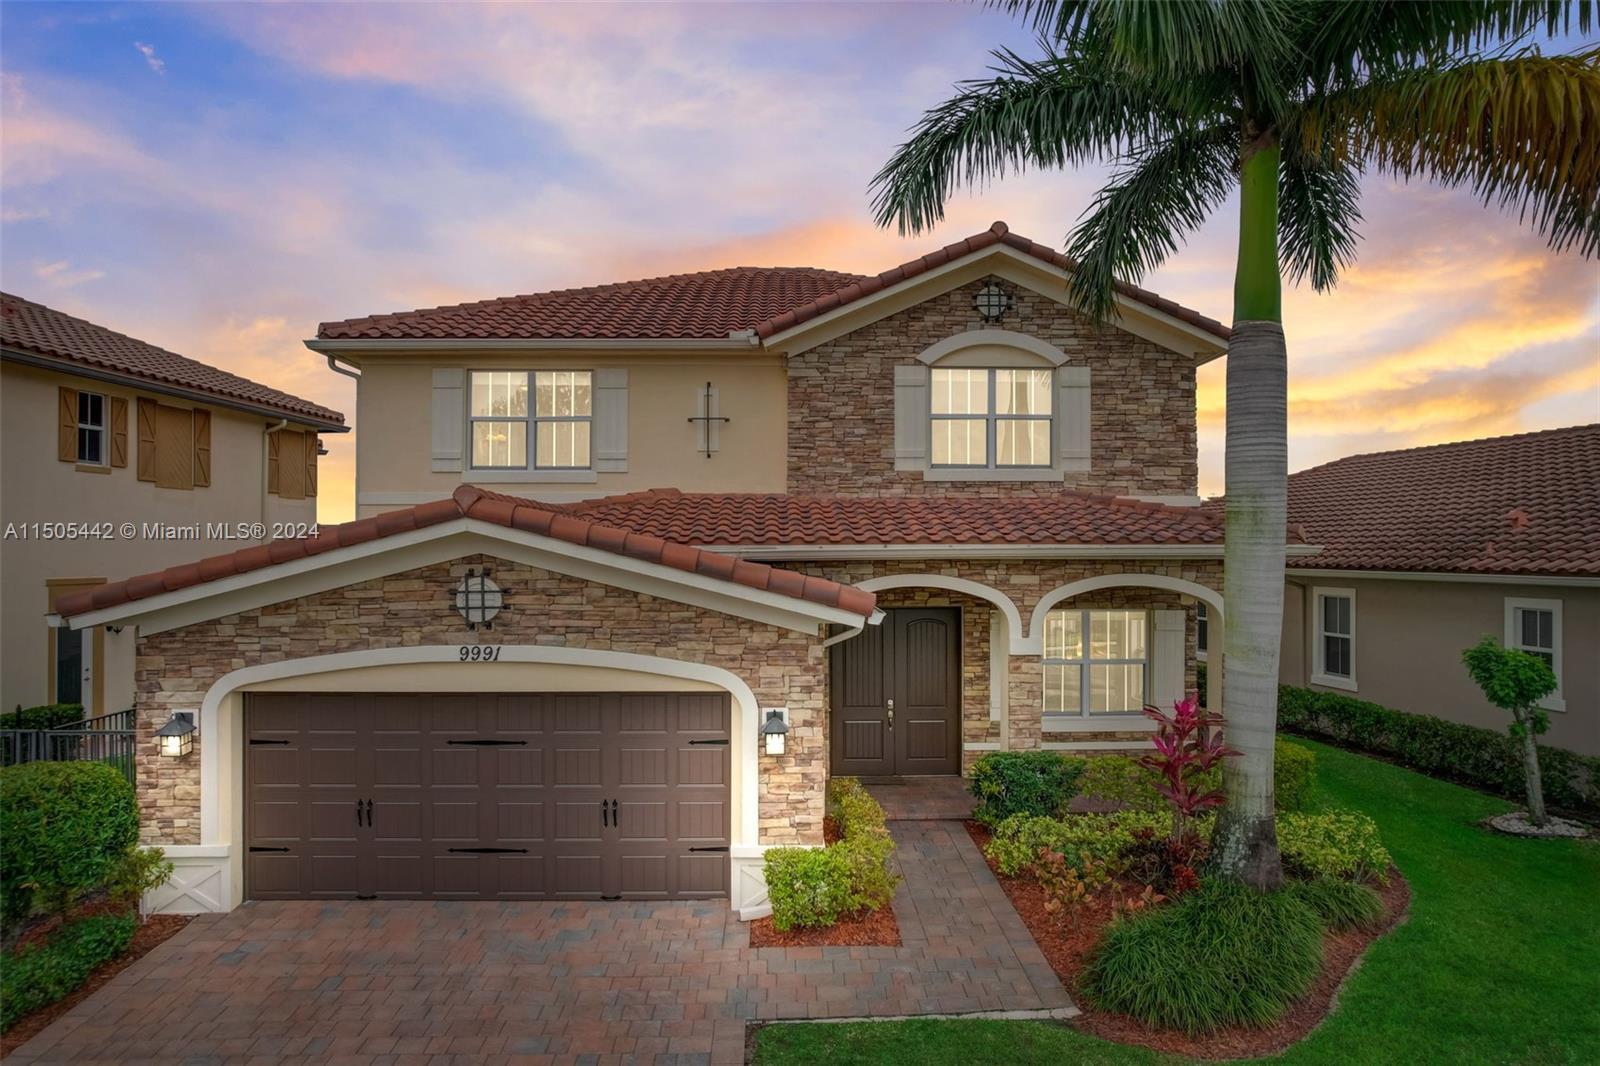 Photo of 9991 S Miralago Wy in Parkland, FL